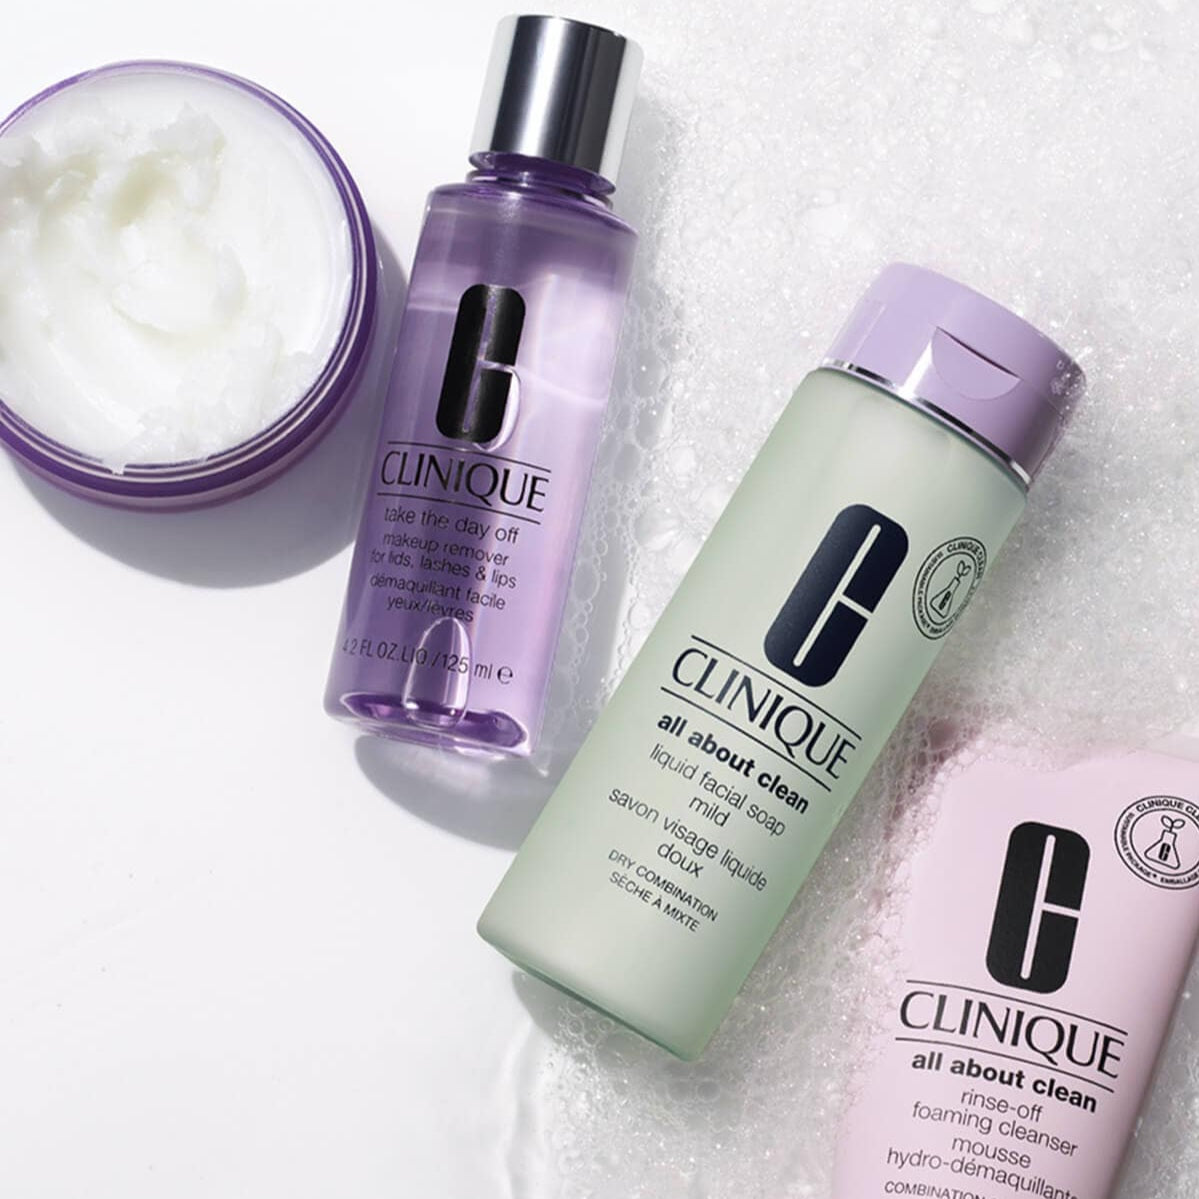 clinique-take-the-day-off-makeup-remover